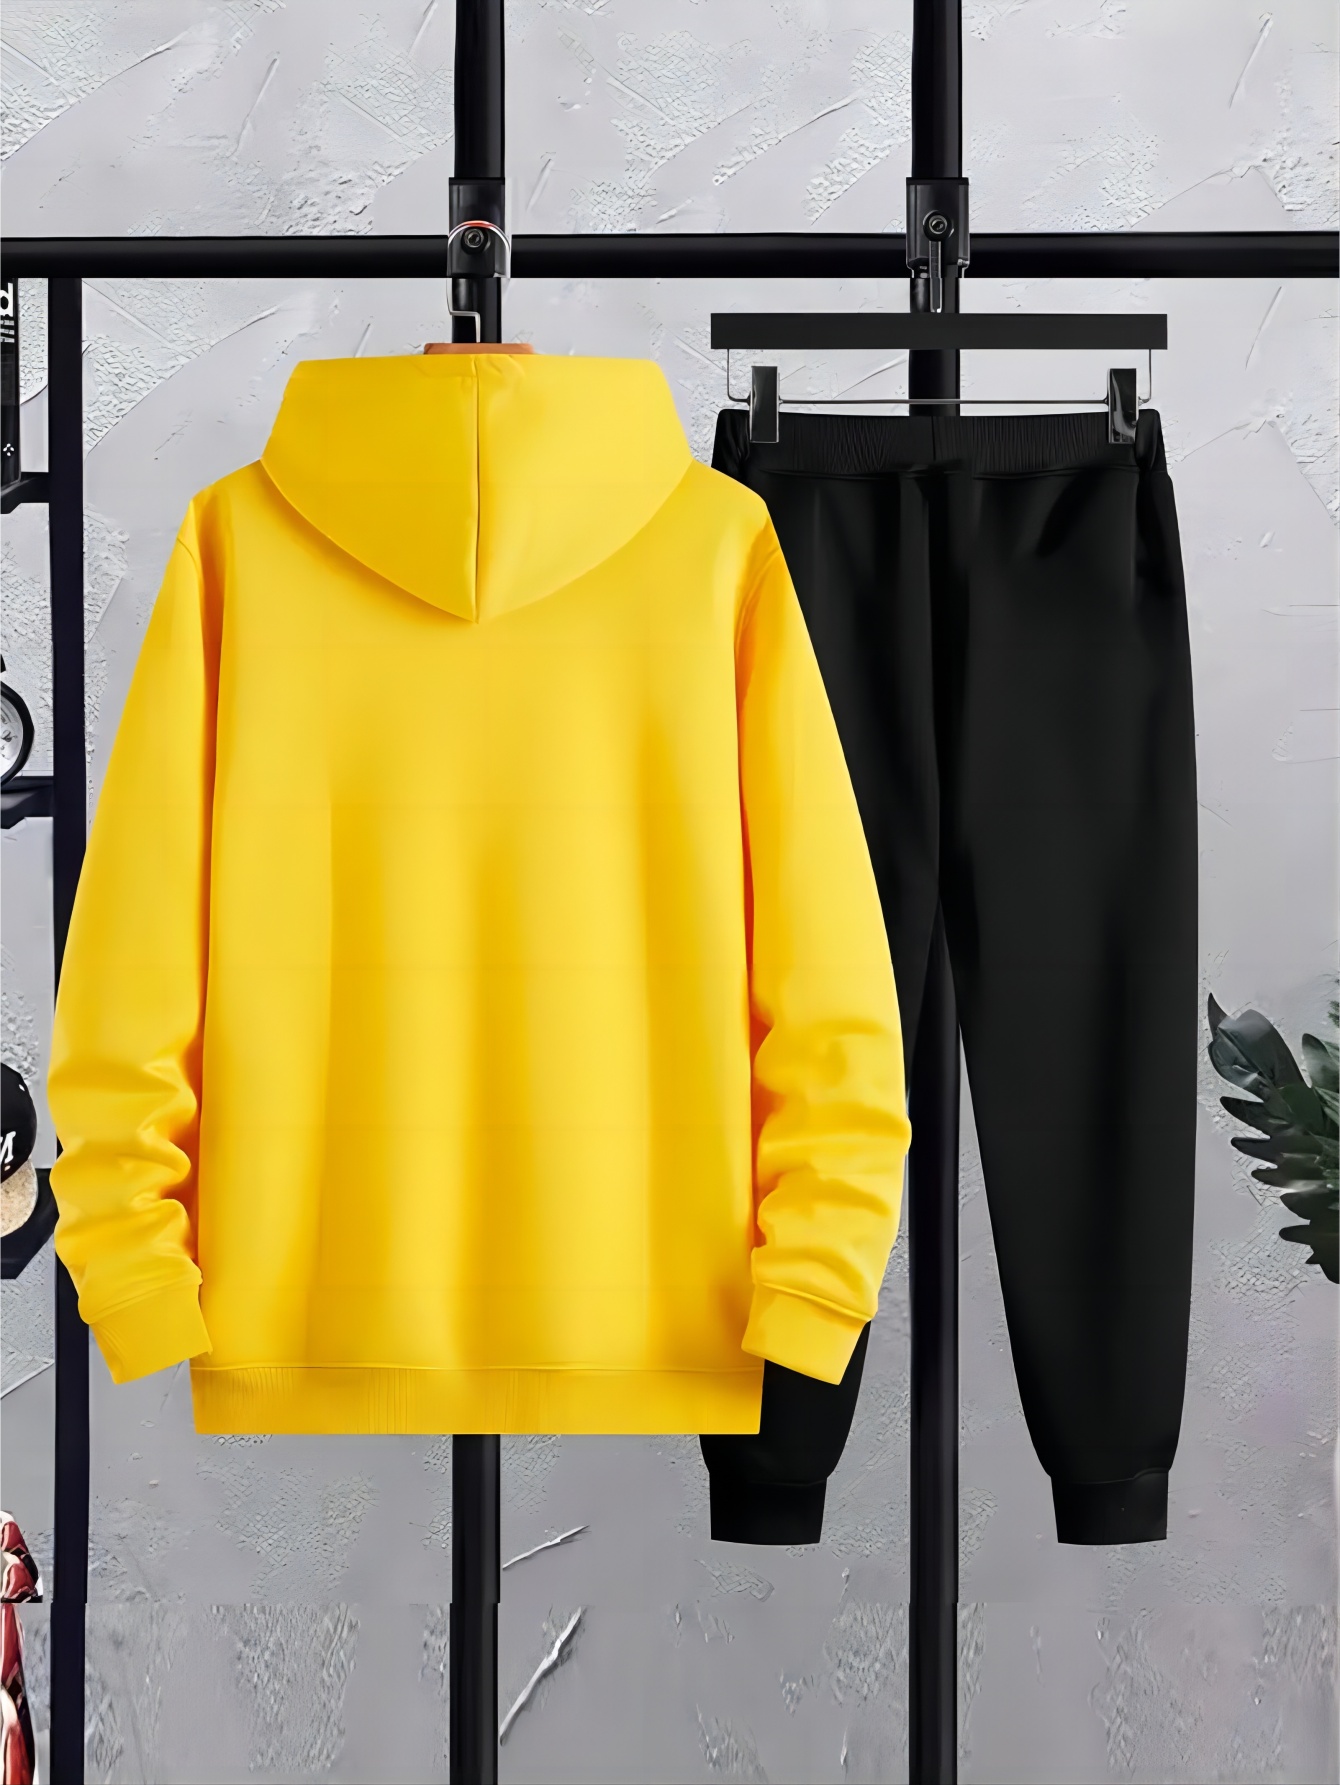 waiting print mens 2pcs outfits casual hoodies long sleeve pullover hooded sweatshirt and sweatpants joggers set for spring fall mens clothing